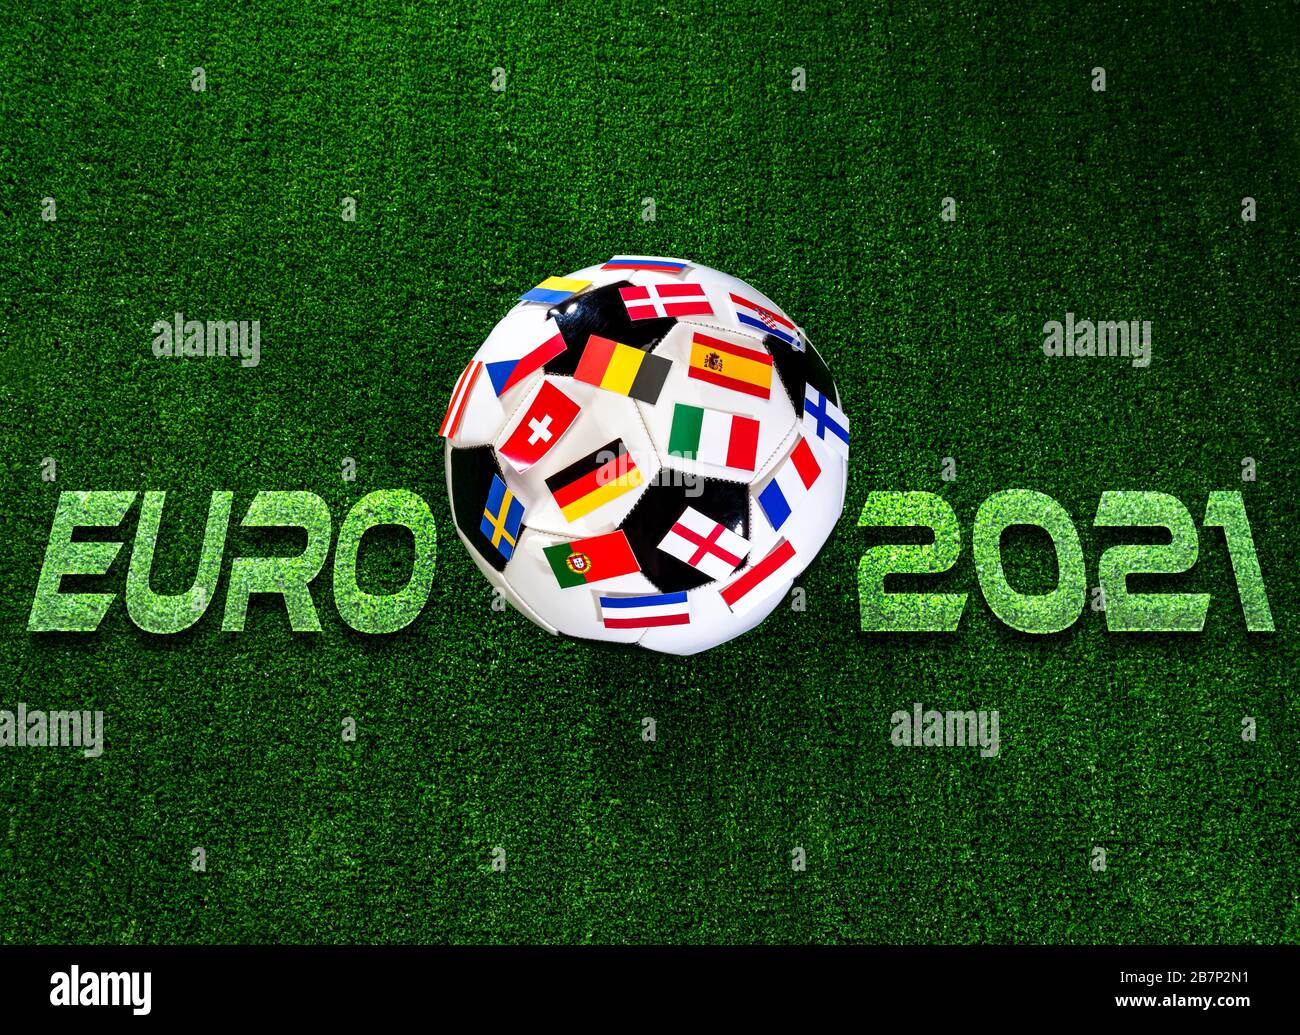 Euro 2021 football championship. Soccer ball with flags of European  countries Stock Photo - Alamy